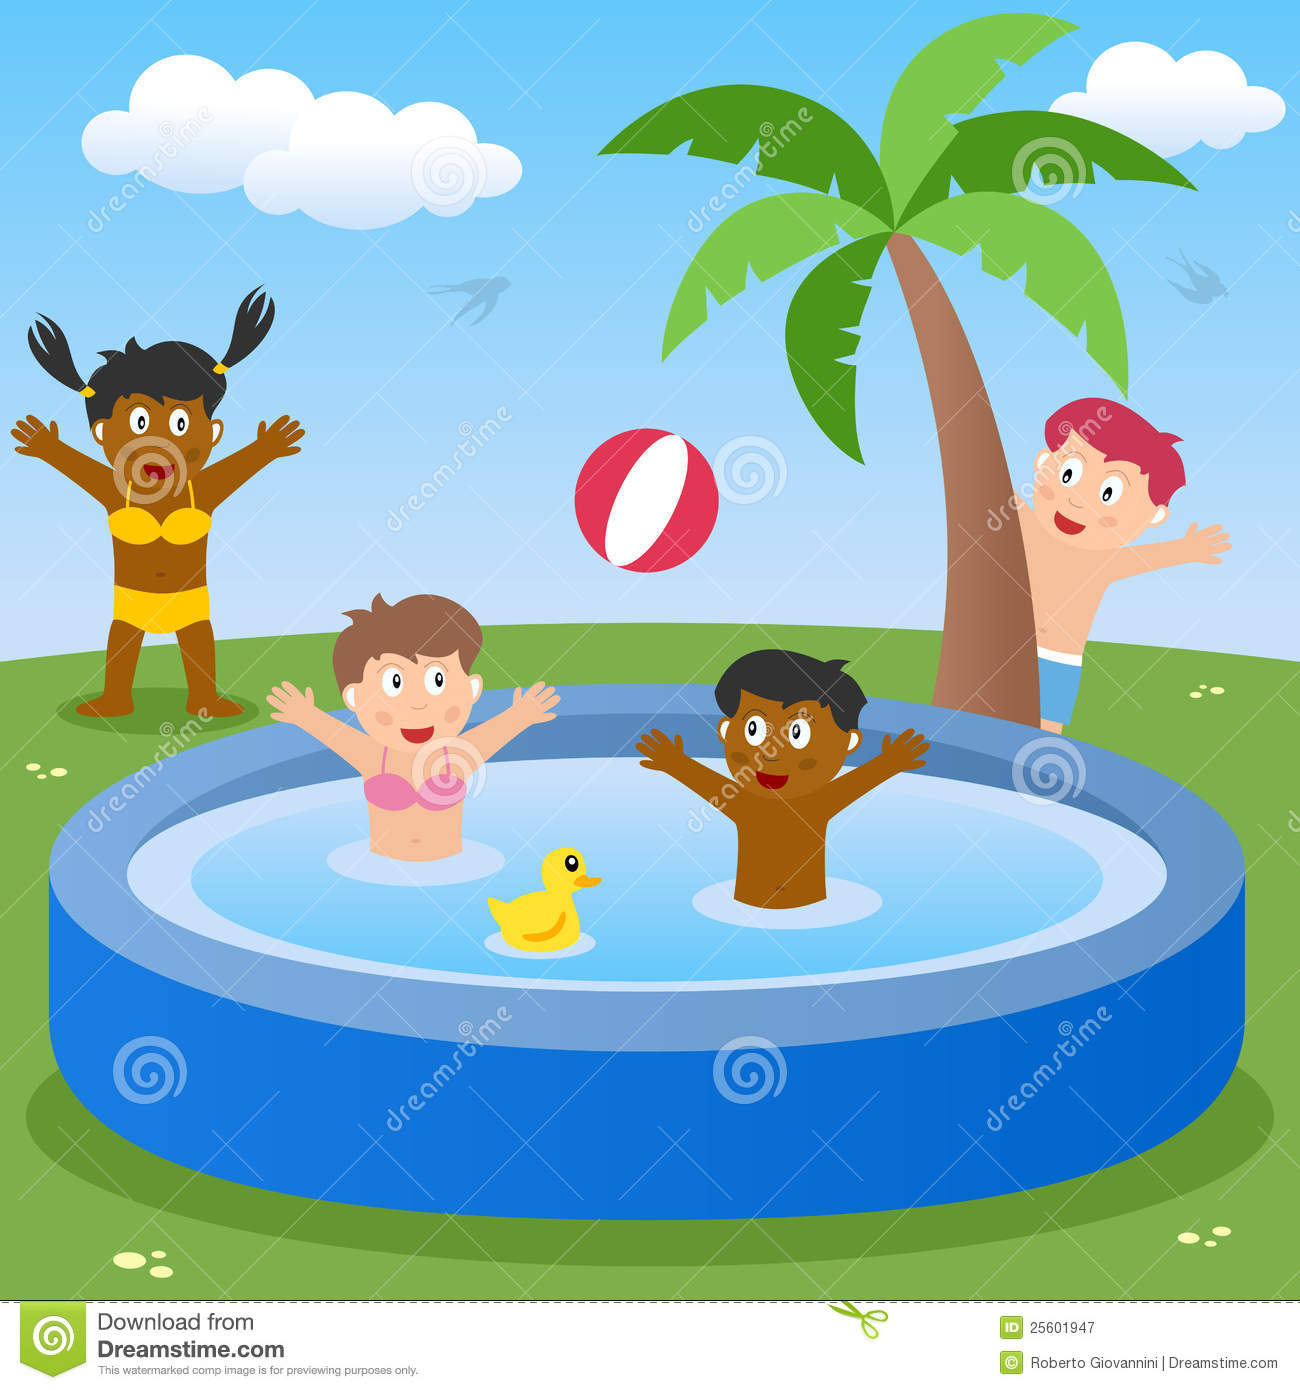 Kids Playing In Paddling Pool Royalty Free Stock Photography   Image